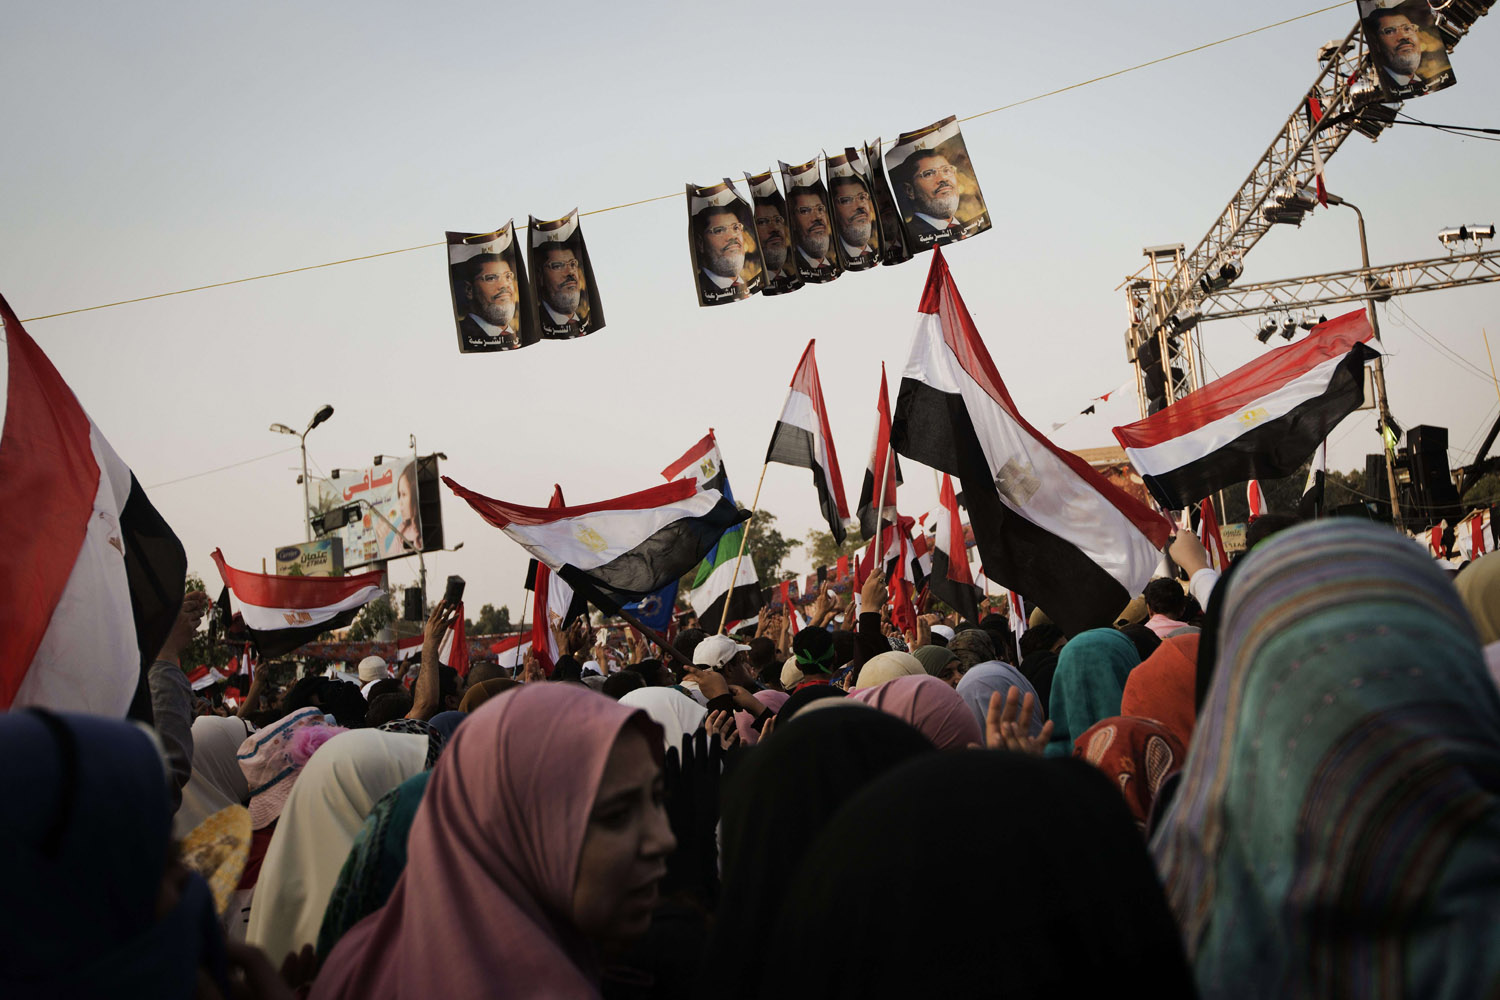 July 15, 2013. Muslim Brotherhood members and supporters of deposed president Mohammed Morsi wave national flags shouting slogans during a rally in his support outside Rabaa al-Adawiya mosque in Cairo, Egypt.